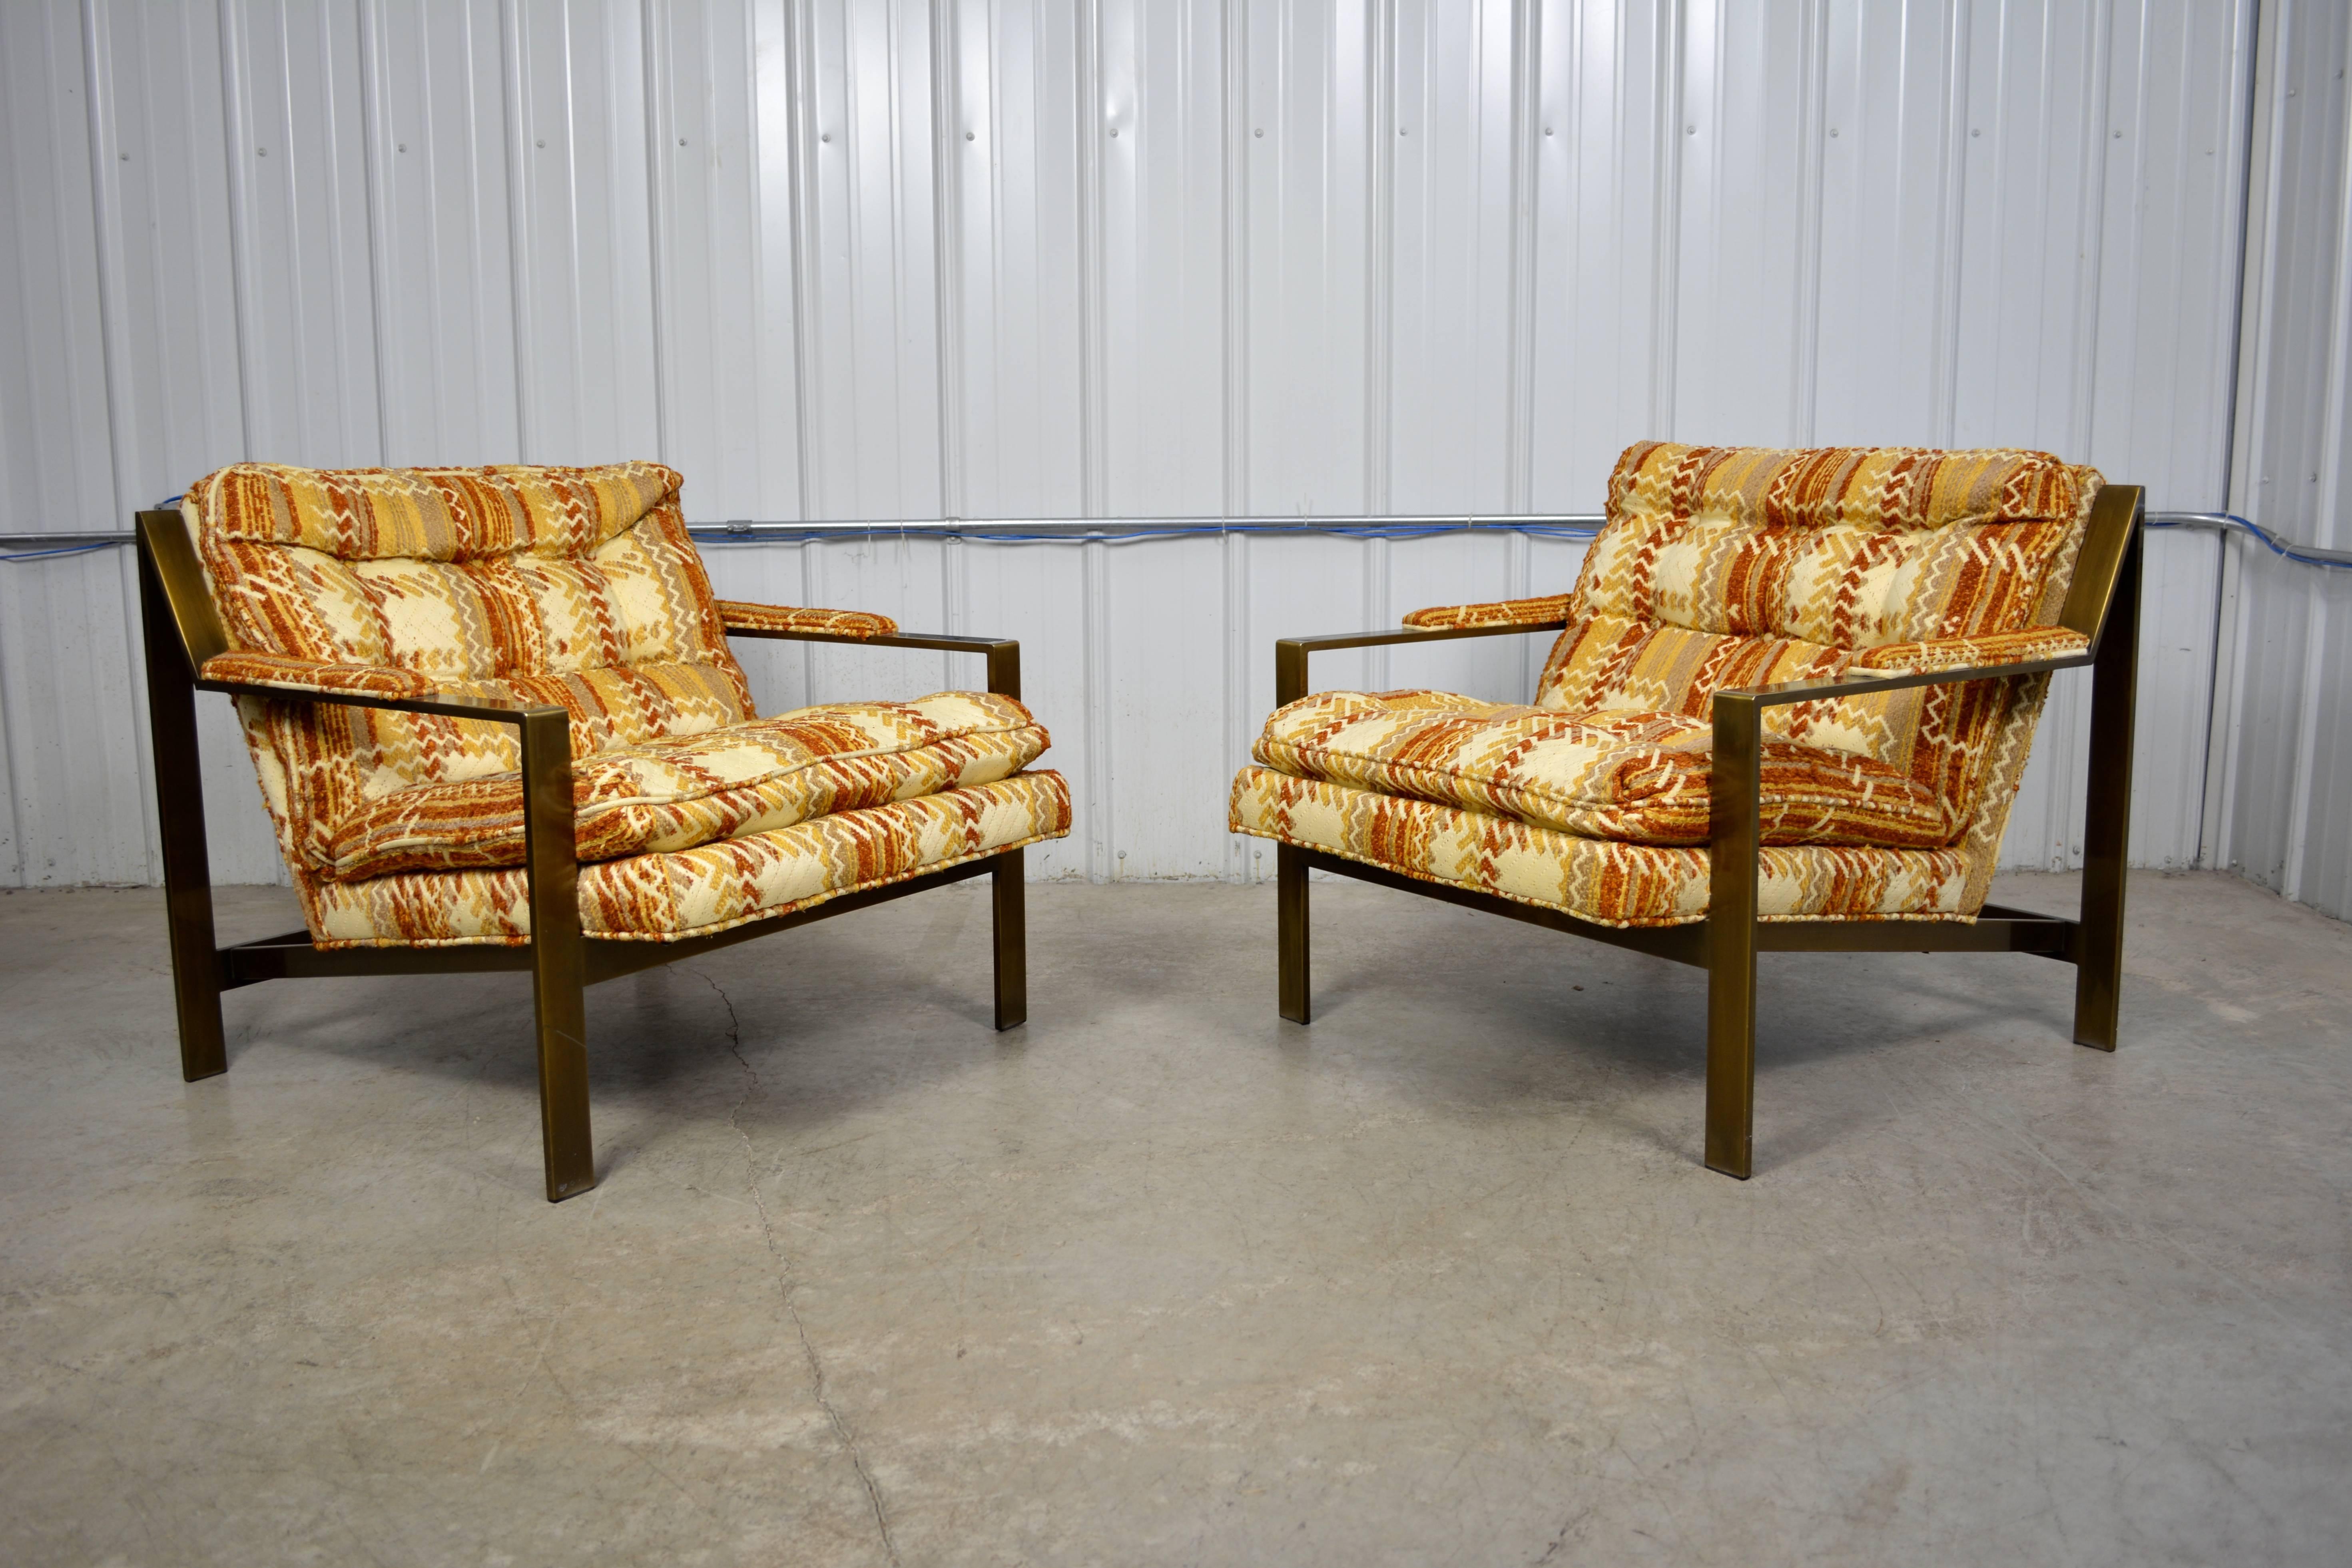 All original bronze frame lounge chairs by Cy Mann.